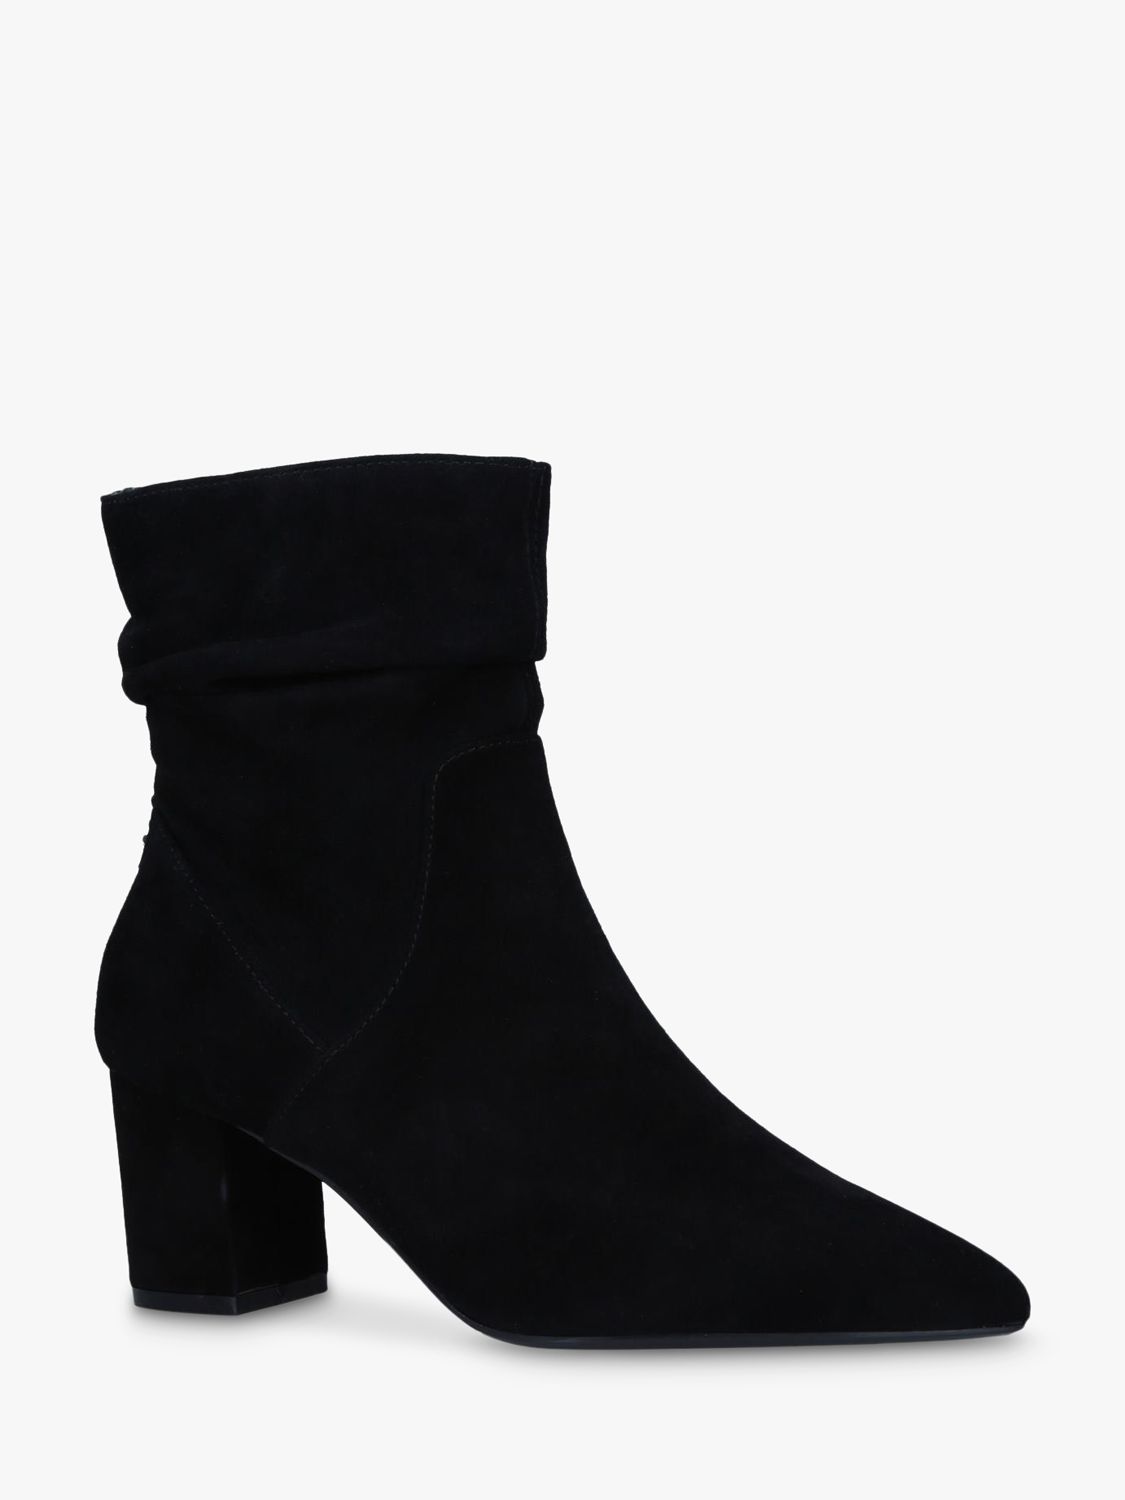 Carvela Admire Low Slouch Suede Ankle Boots, Black, 3